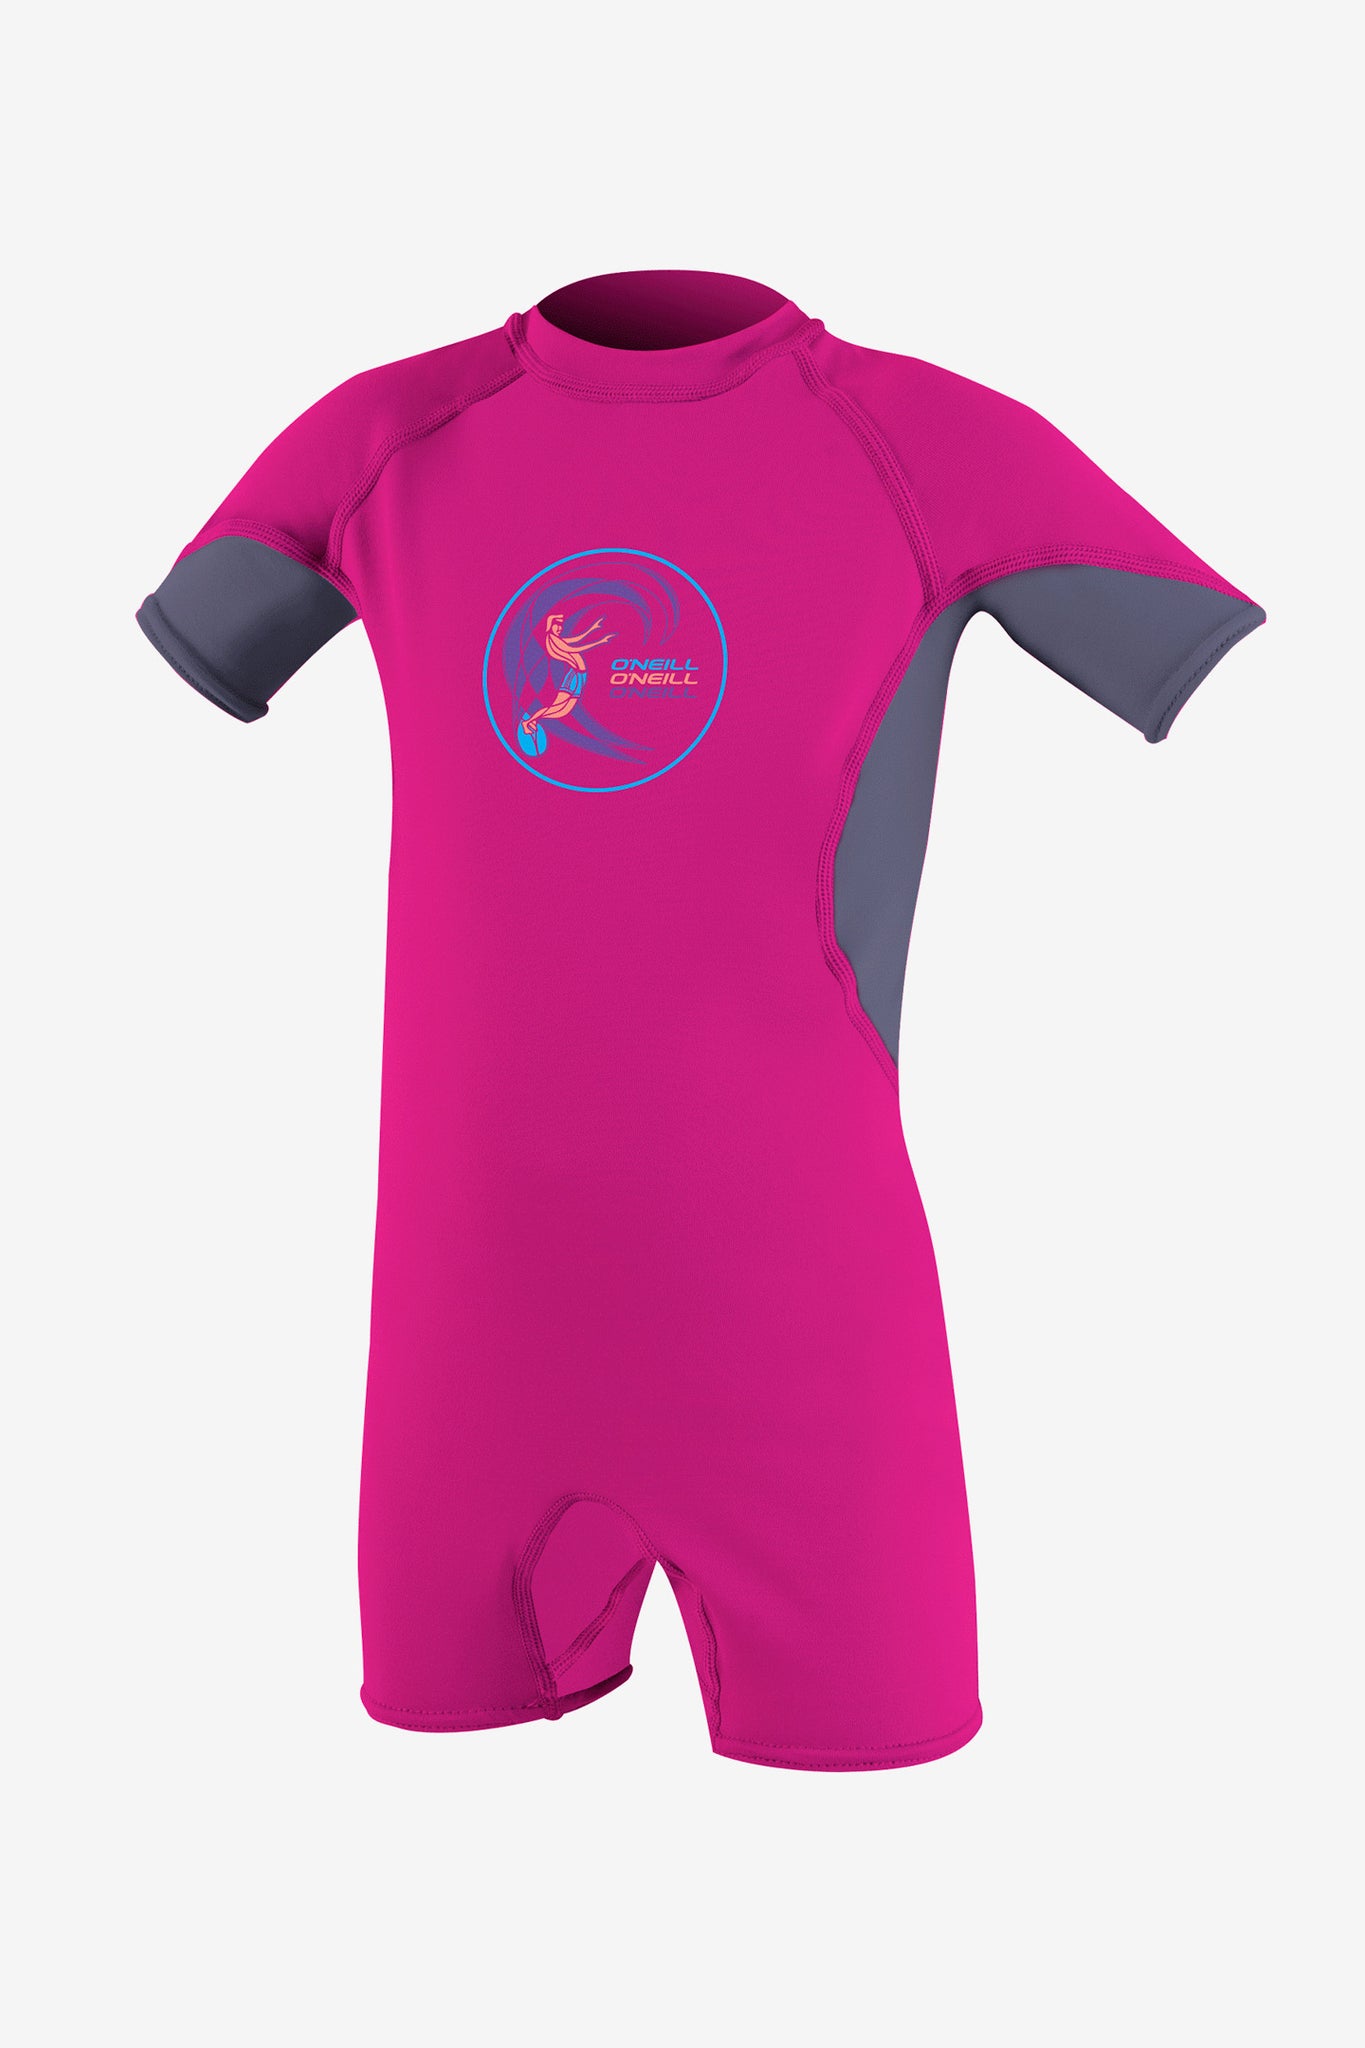 TODDLER O'ZONE S/S SPRING WETSUIT